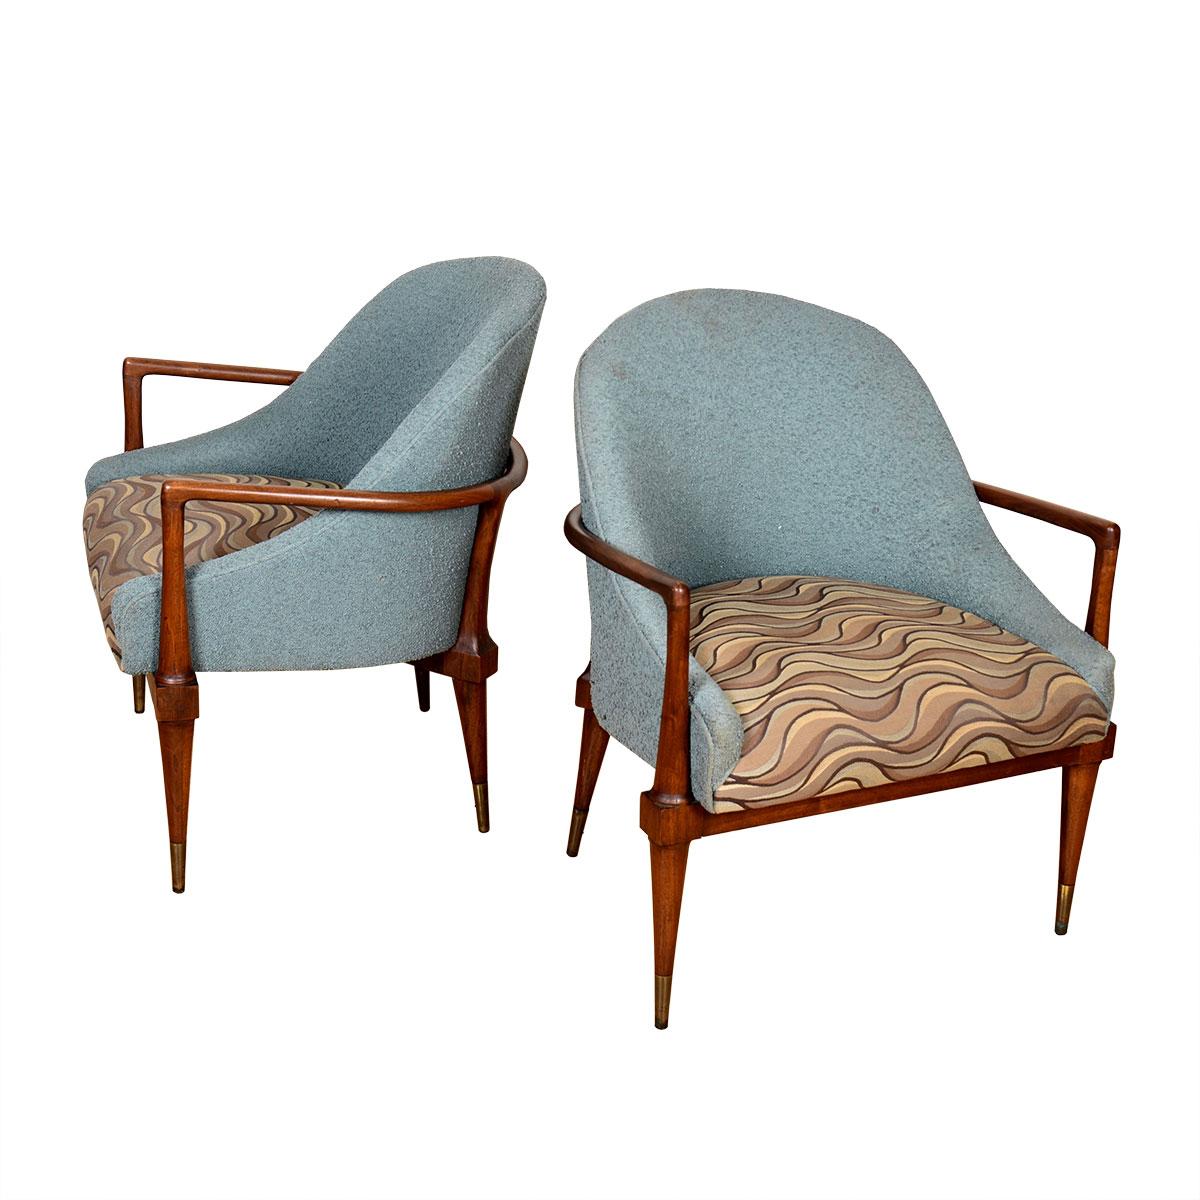 An open walnut frame nestles a fully upholstered seat on these gracious chairs by Thomas Robbsjohn-Gibbings. The rounded frame is echoed in by the rounded shape of the backrest. Beautiful details on the chair frame attest to the high quality